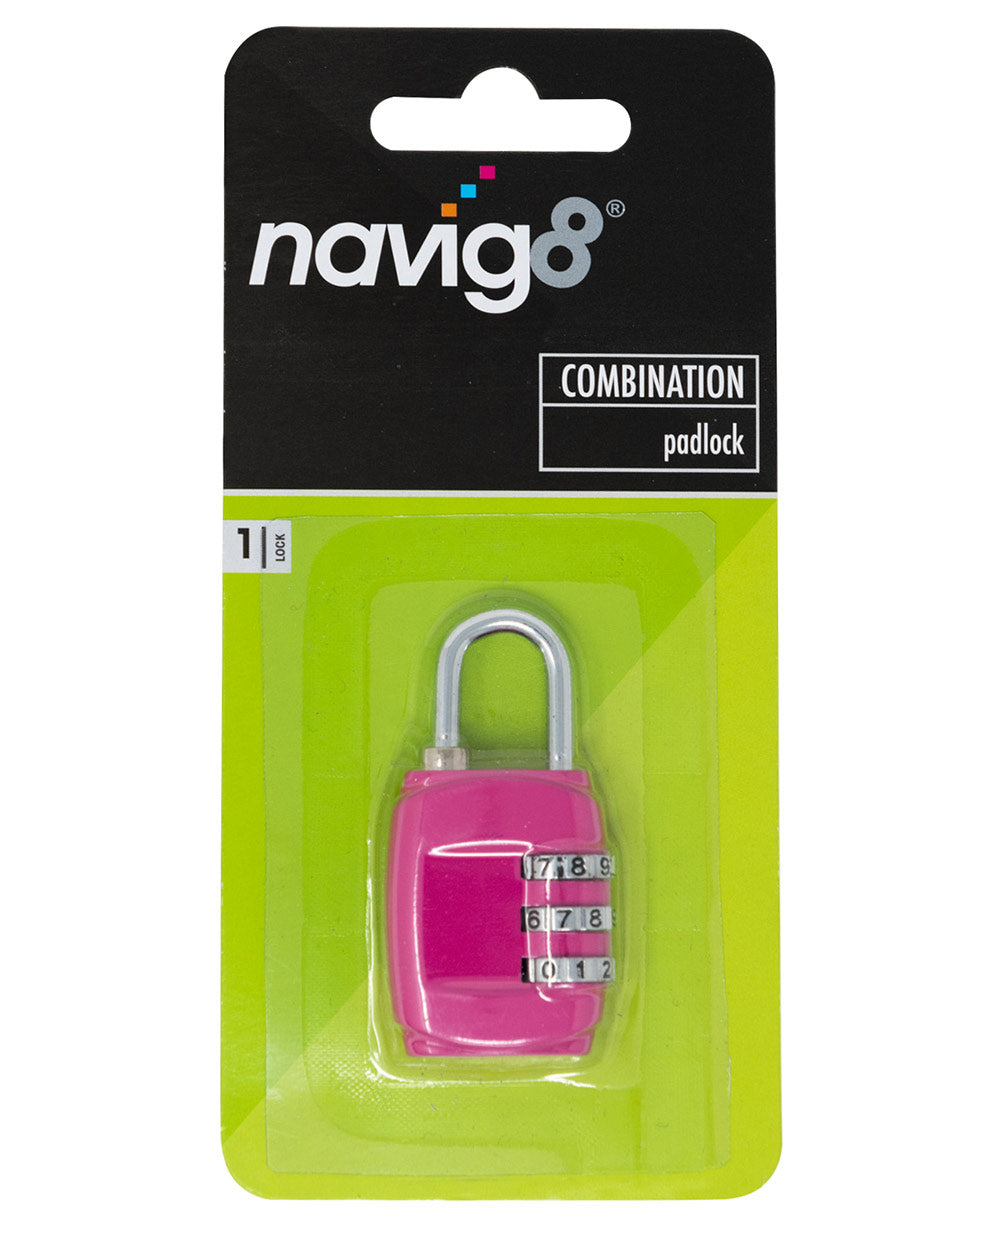 Combination Padlock Suitcase Travel Pink in packaging on a white back ground